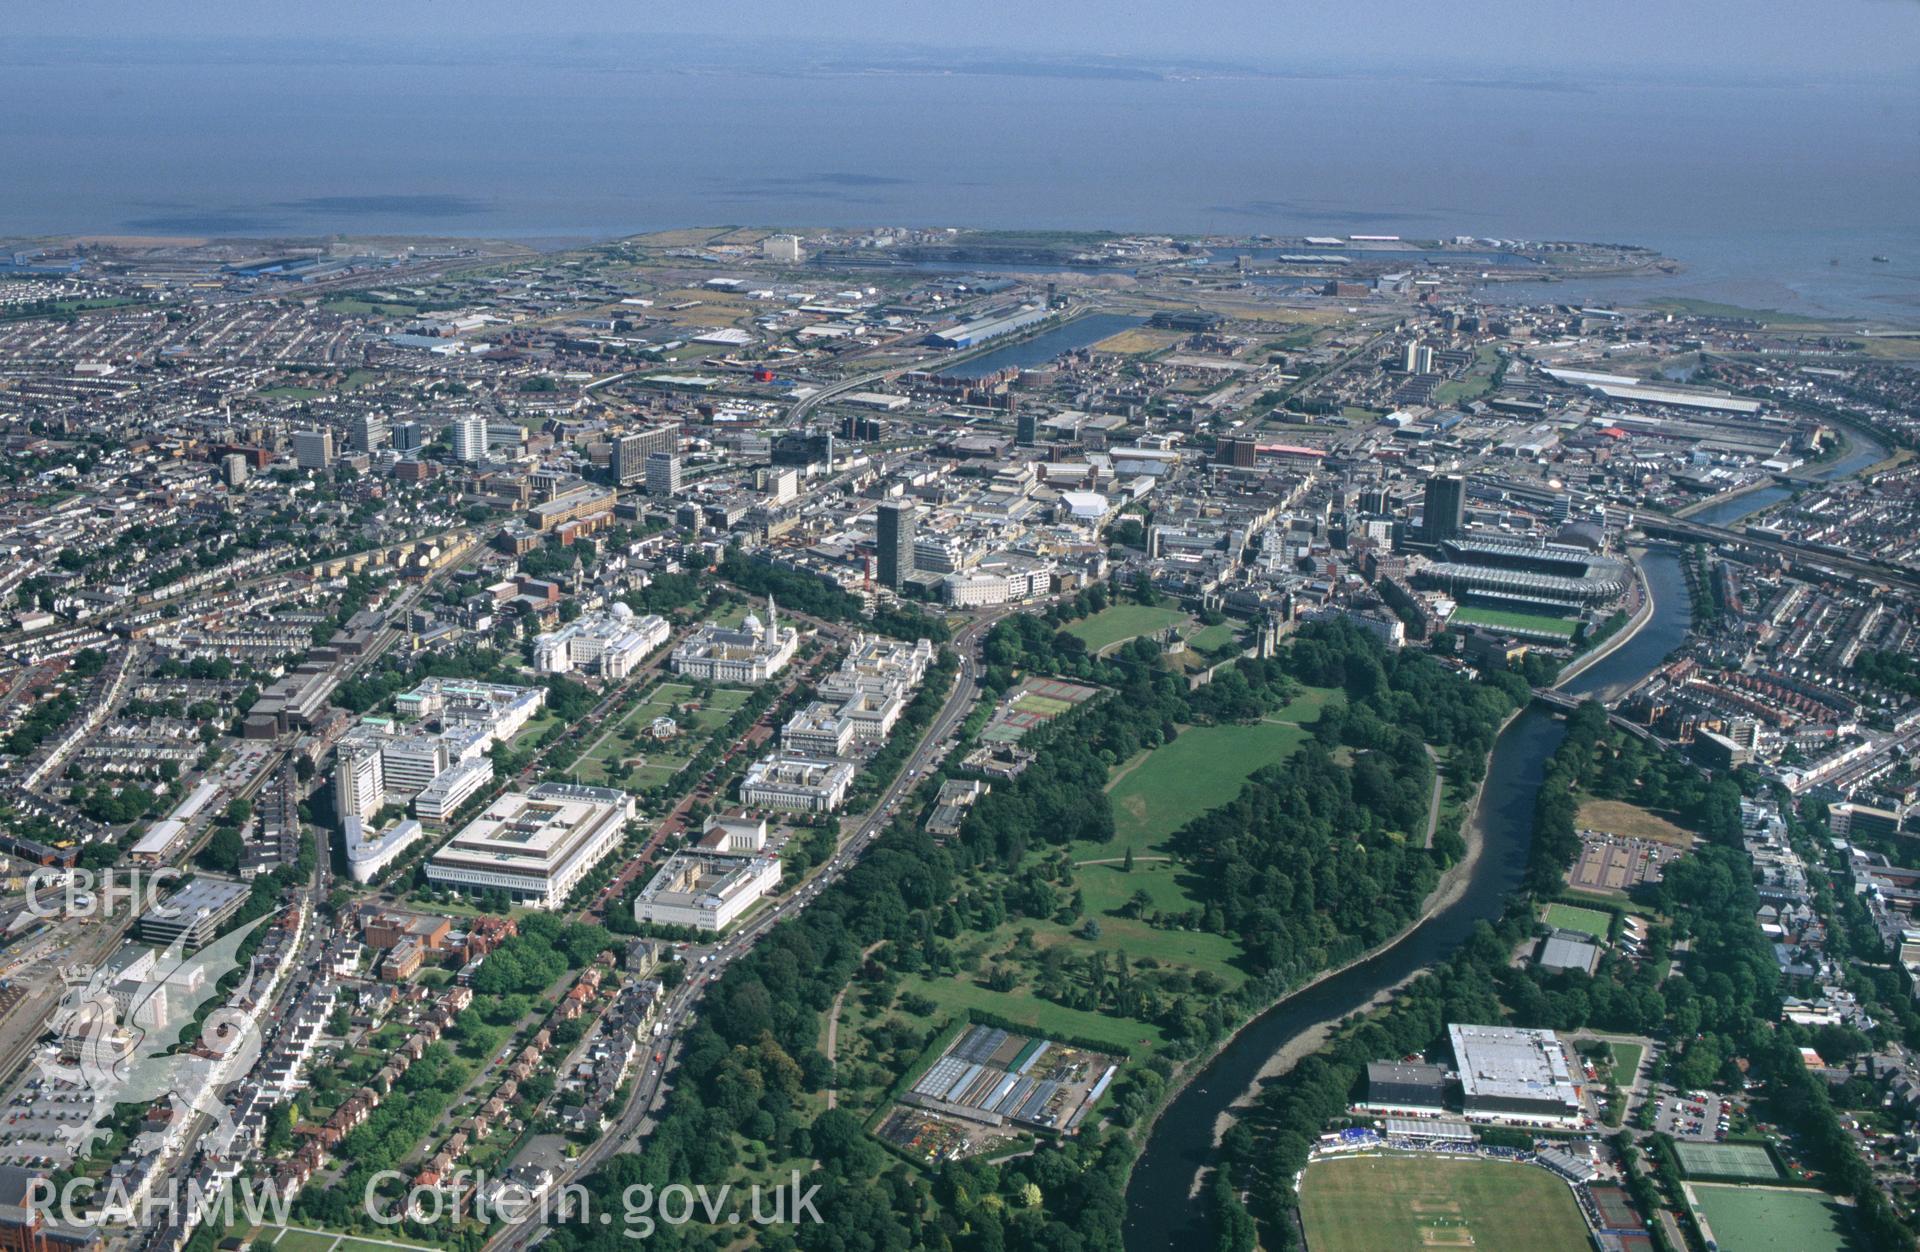 RCAHMW colour slide aerial photograph of Cardiff Sophia Gardens, Castle and Priory. Taken by C R Musson on 20/07/1995